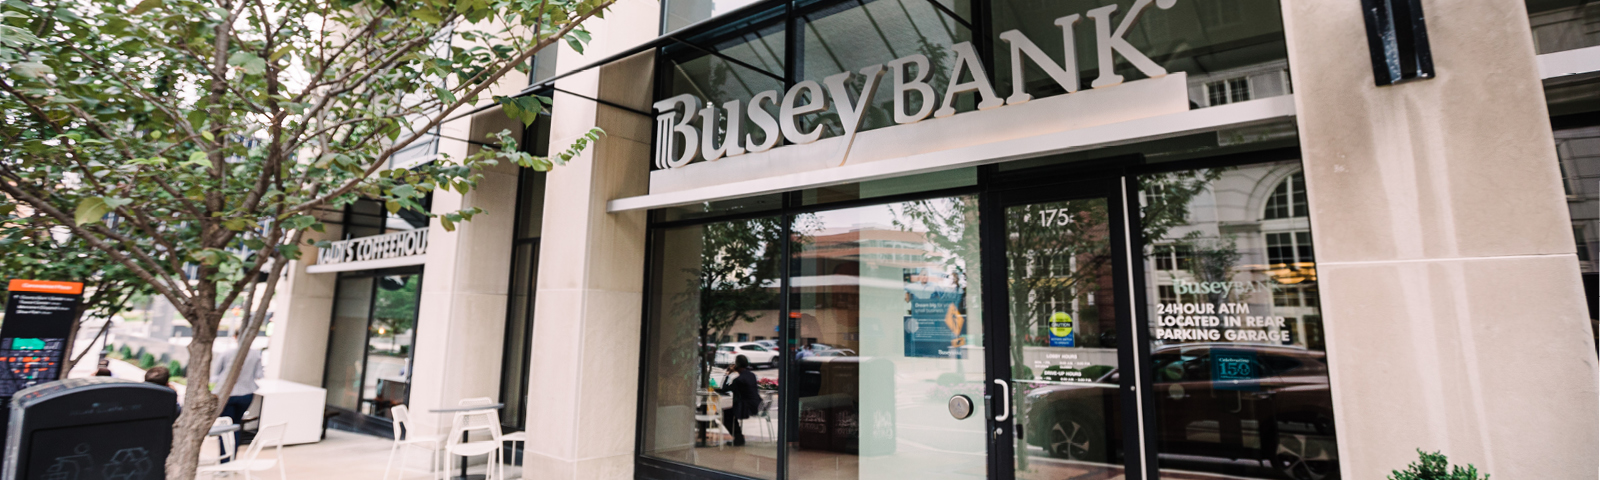 Busey Bank Clayton location